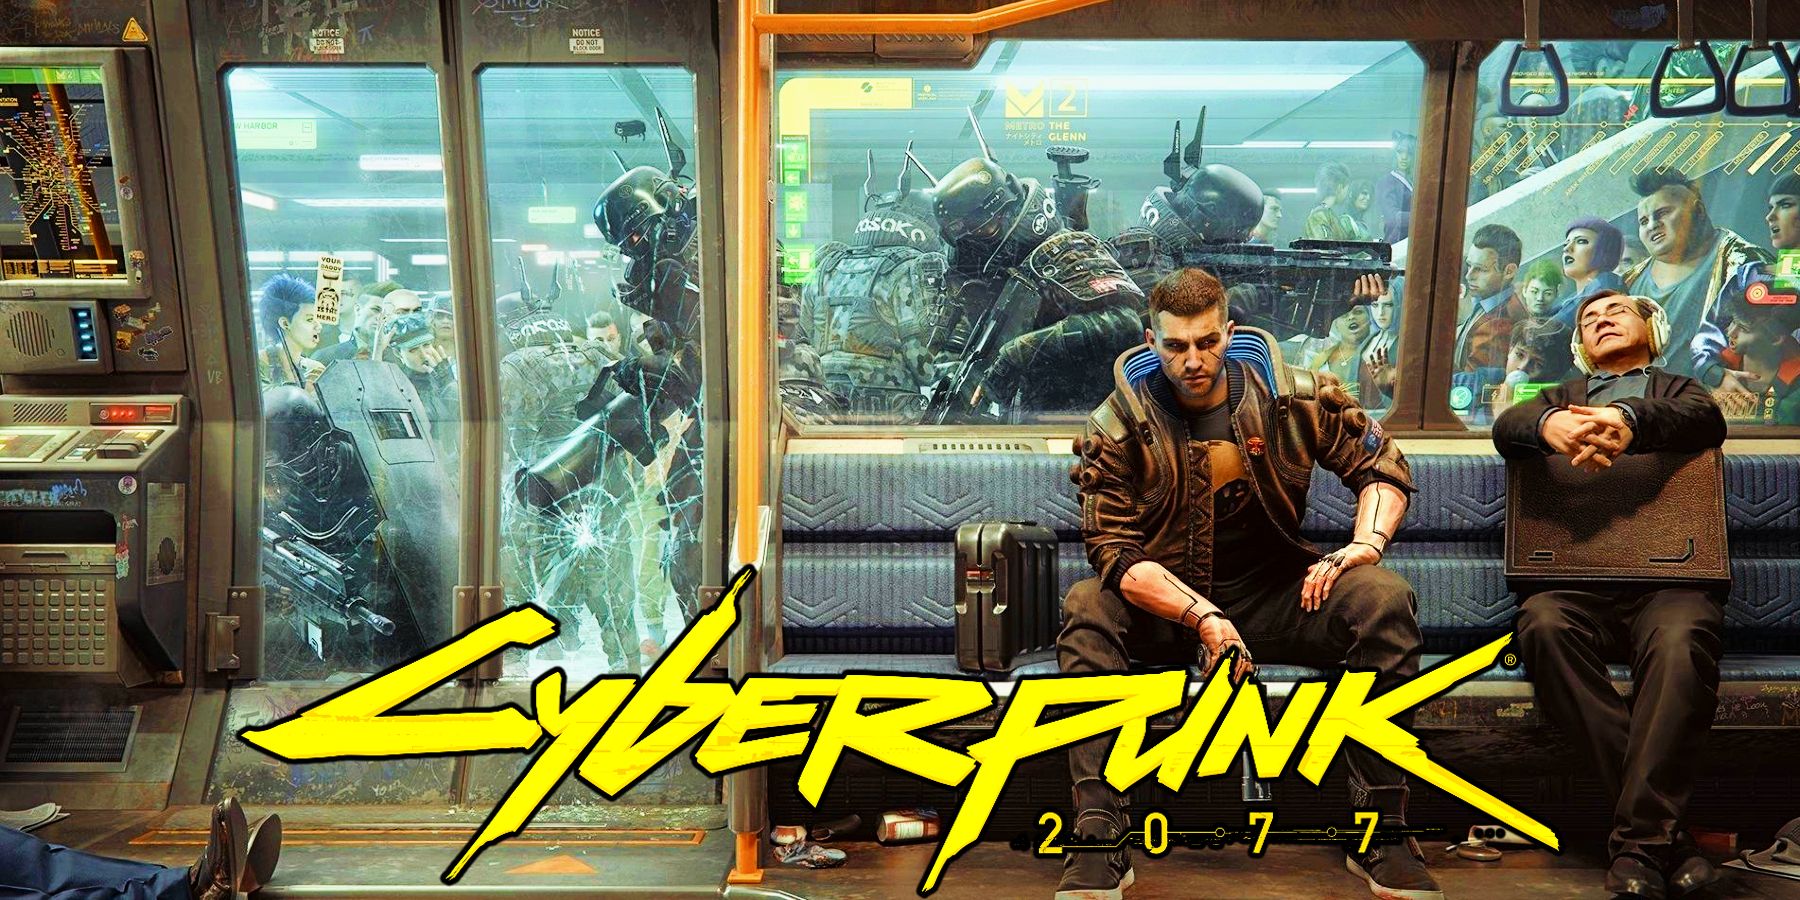 cyberpunk 2077 train monorail with two characters